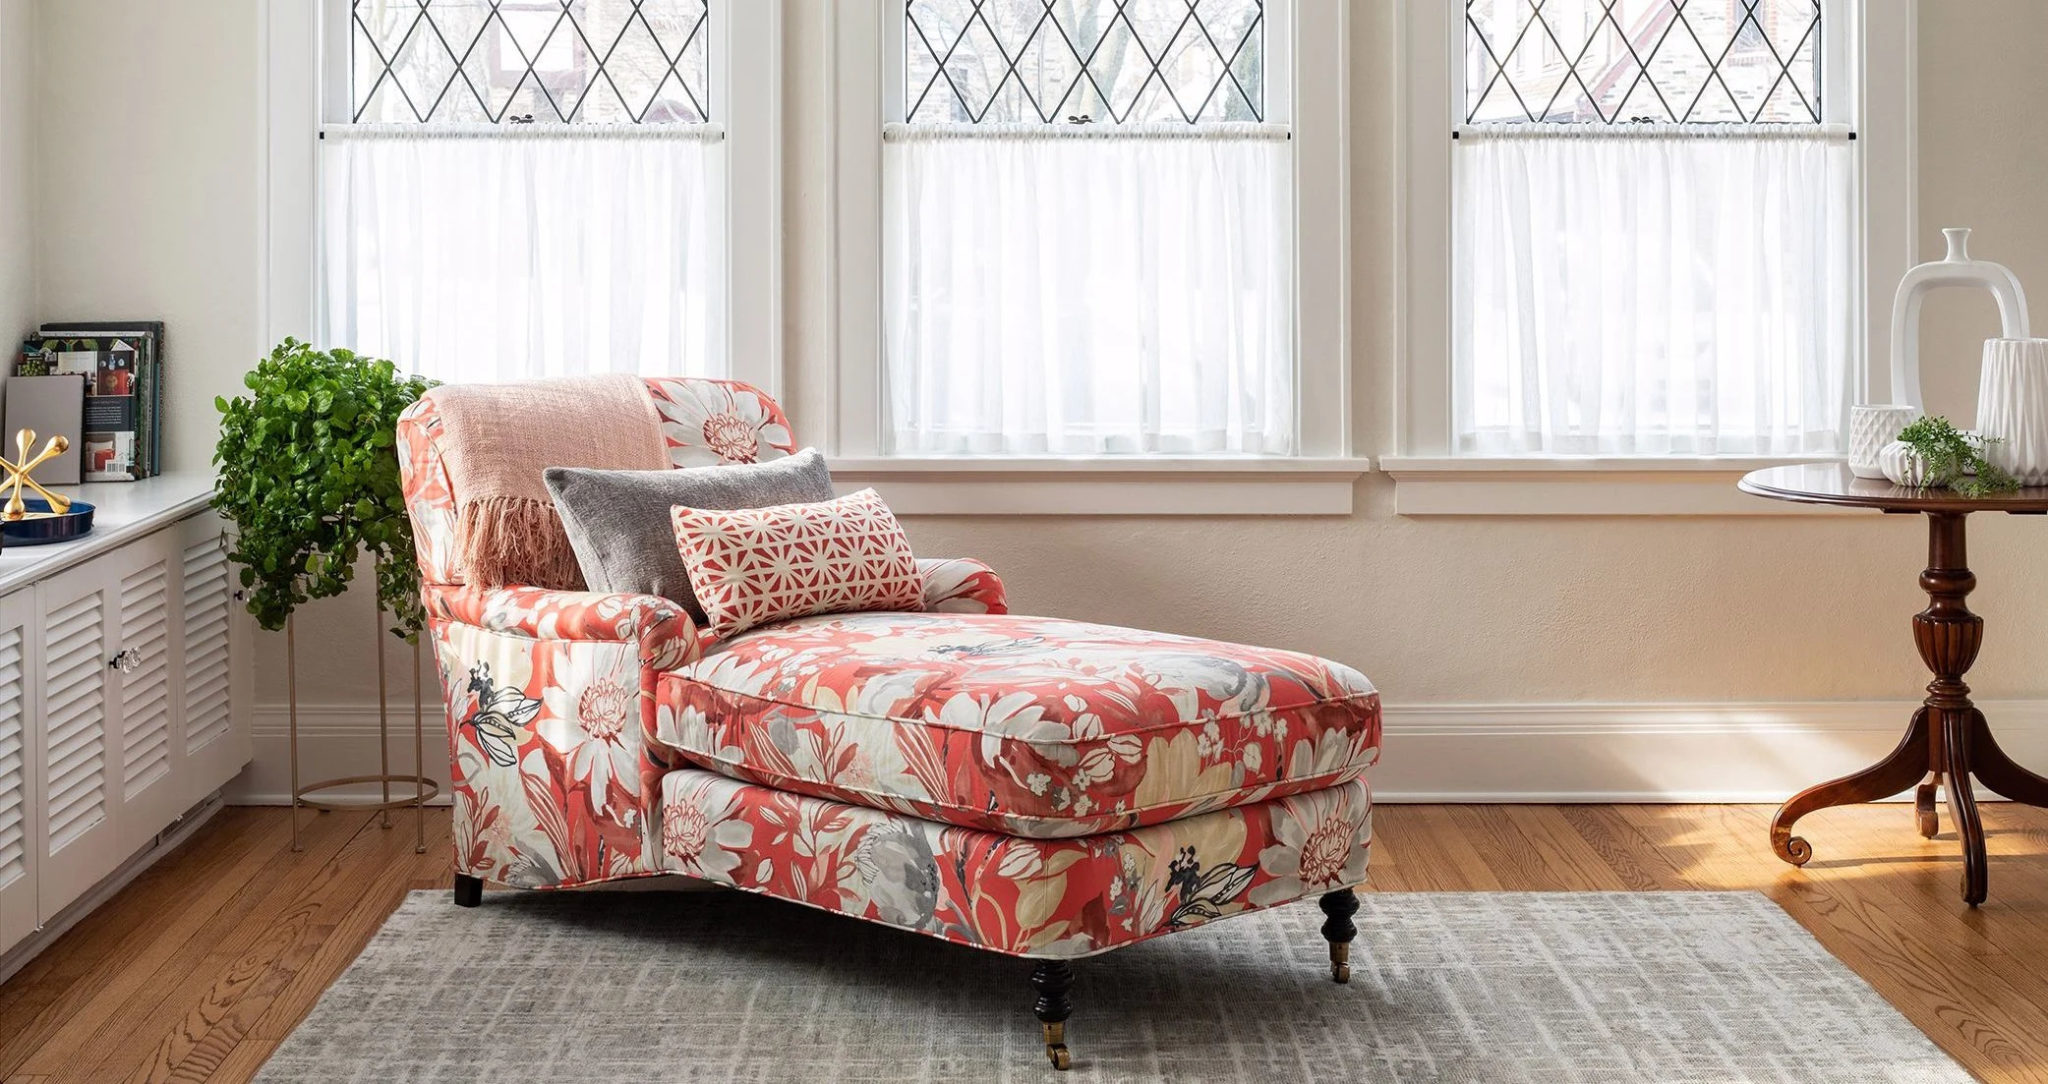 Add whimsy to your space with a chaise lounge